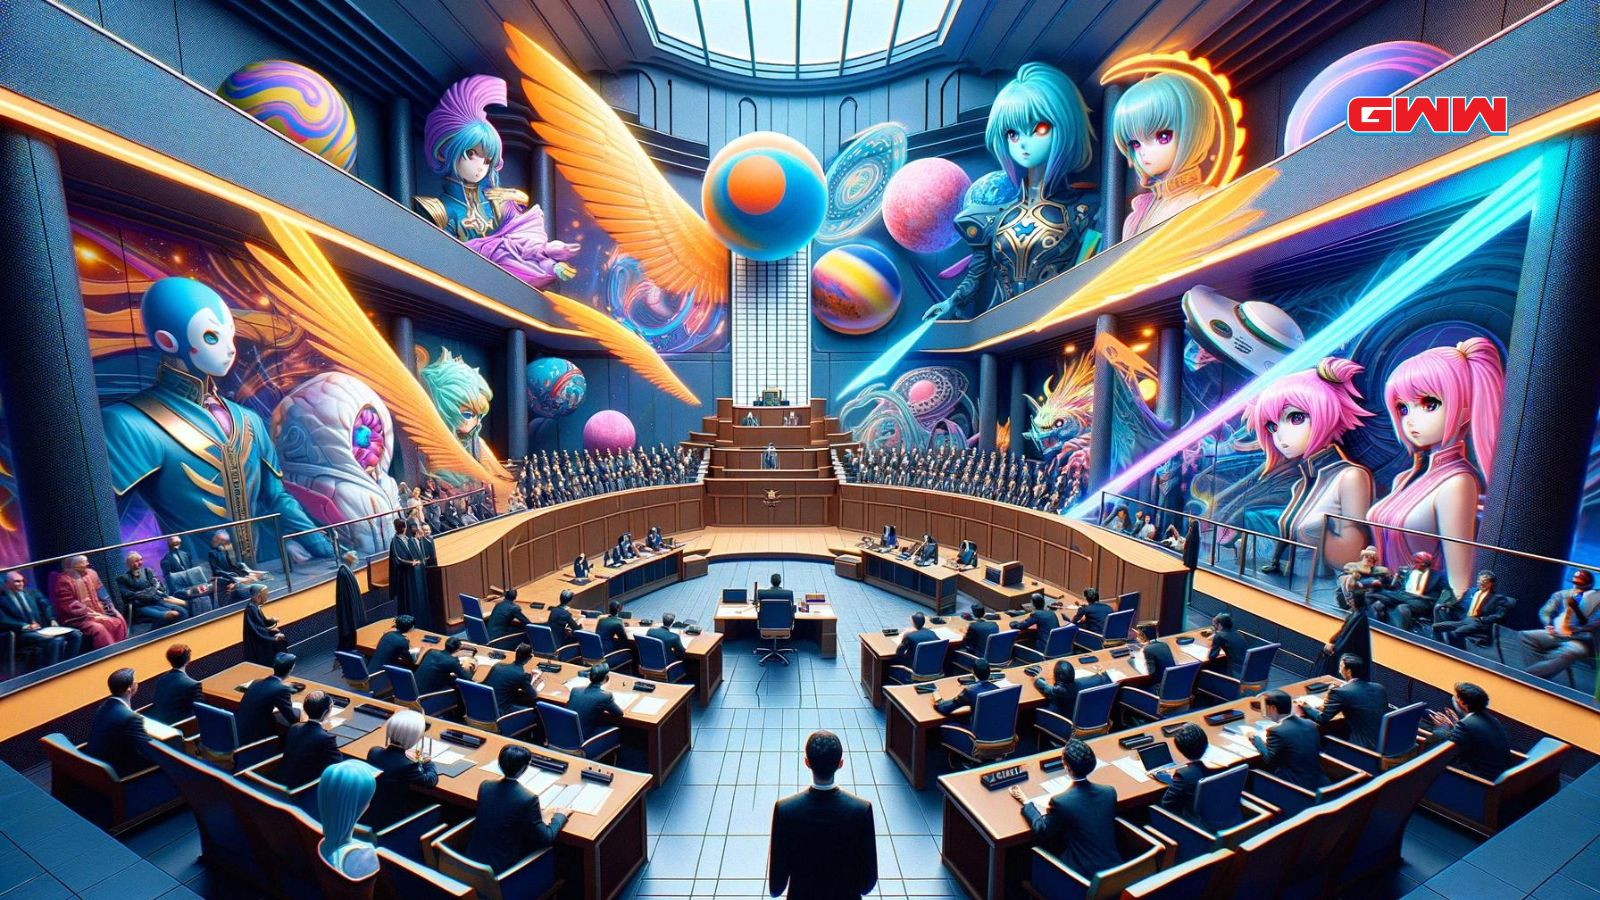 A courtroom drama themed around the legality of "Anime-Planet," styled with vibrant and exaggerated anime elements